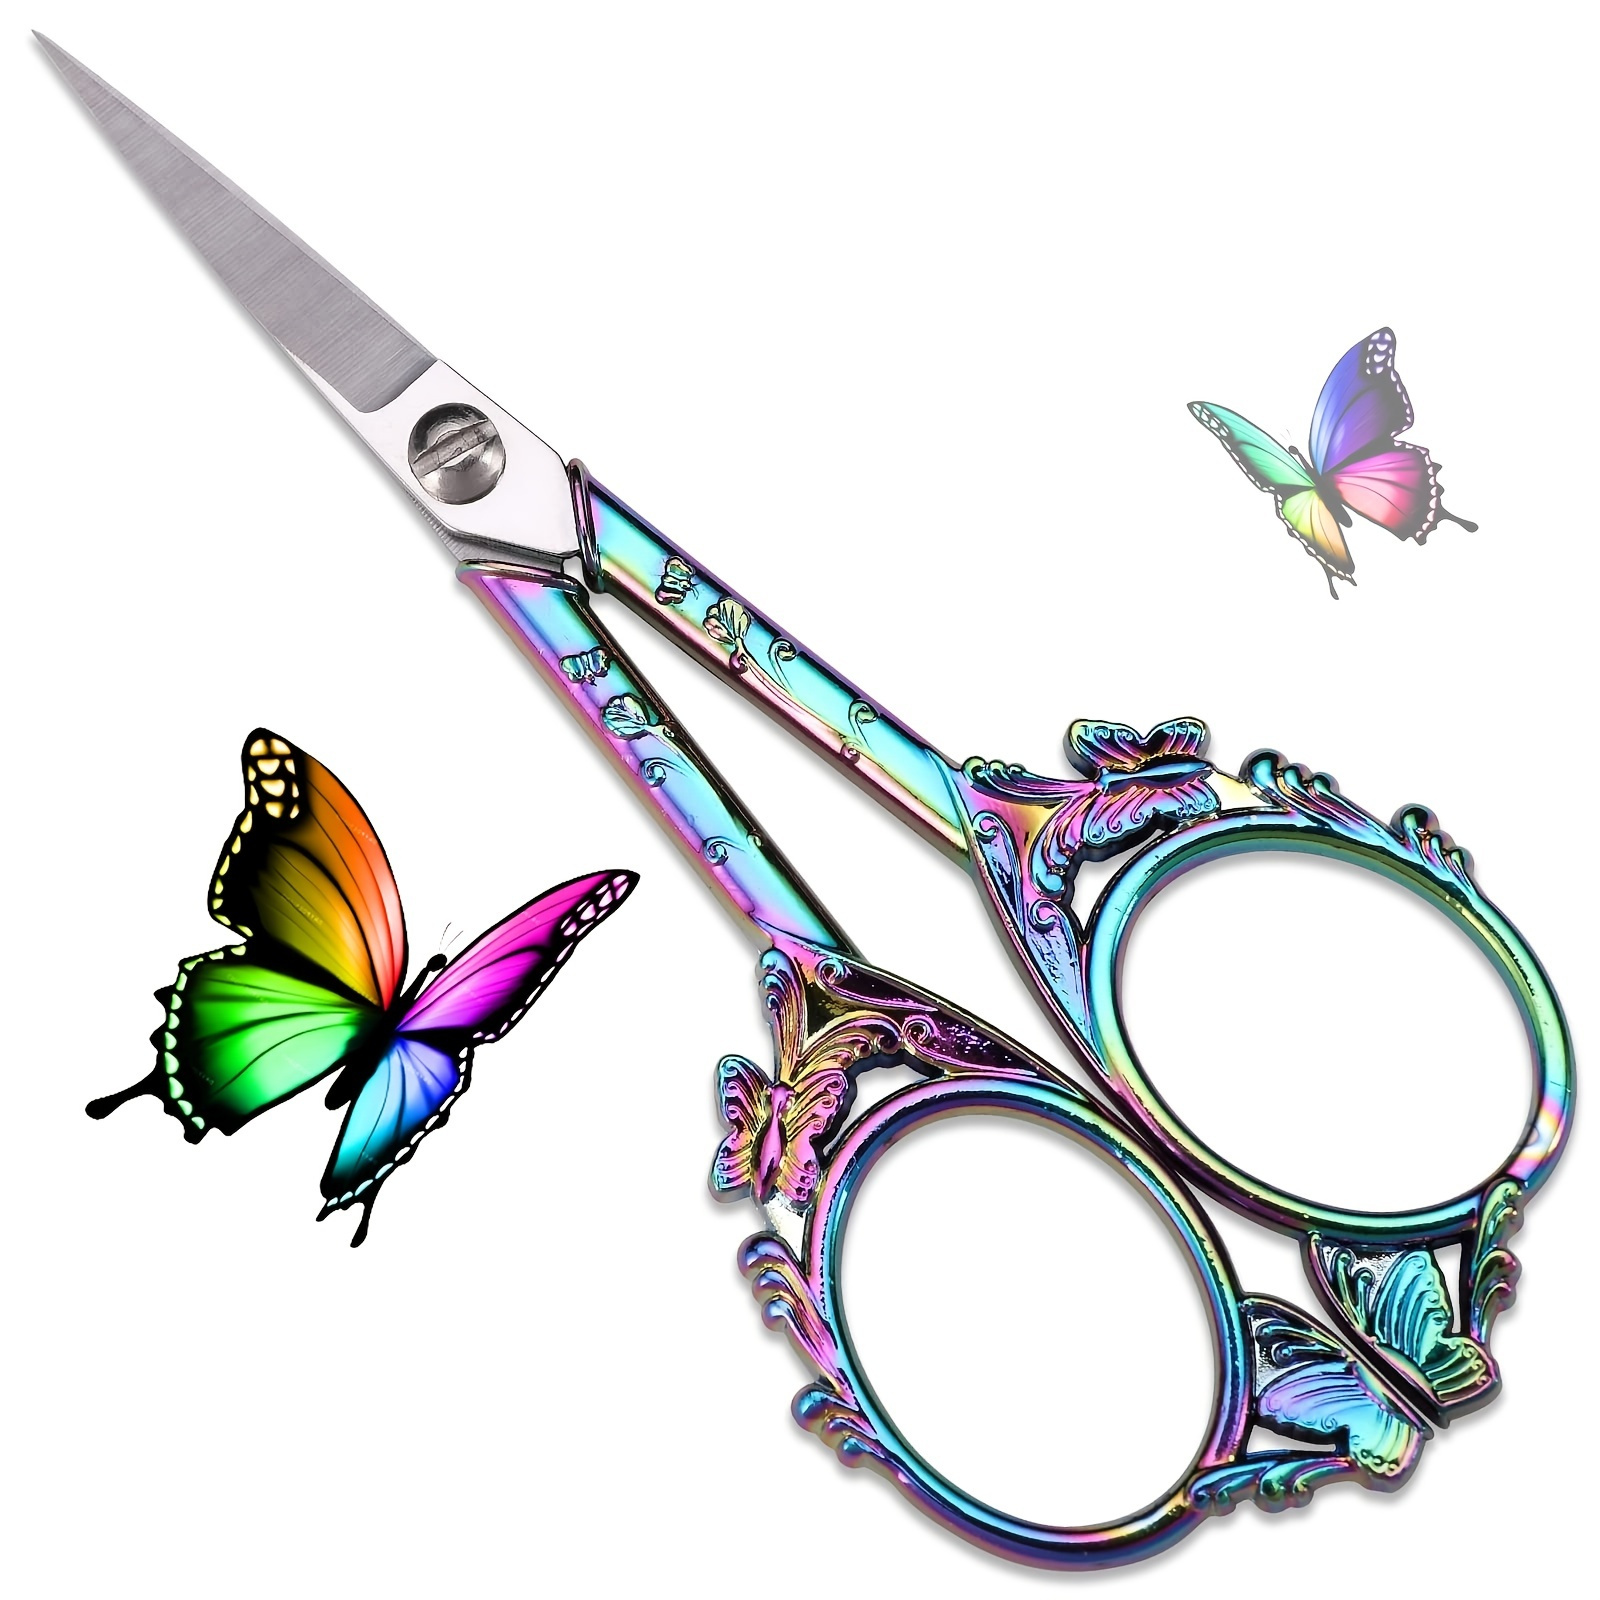 1pc Pinking Shears For Fabric Cutting, Zig Zag Scissors, Scrapbook Scissors  Decorative Edge , Great For Many Kinds Of Sewing Fabrics Leather And Craft